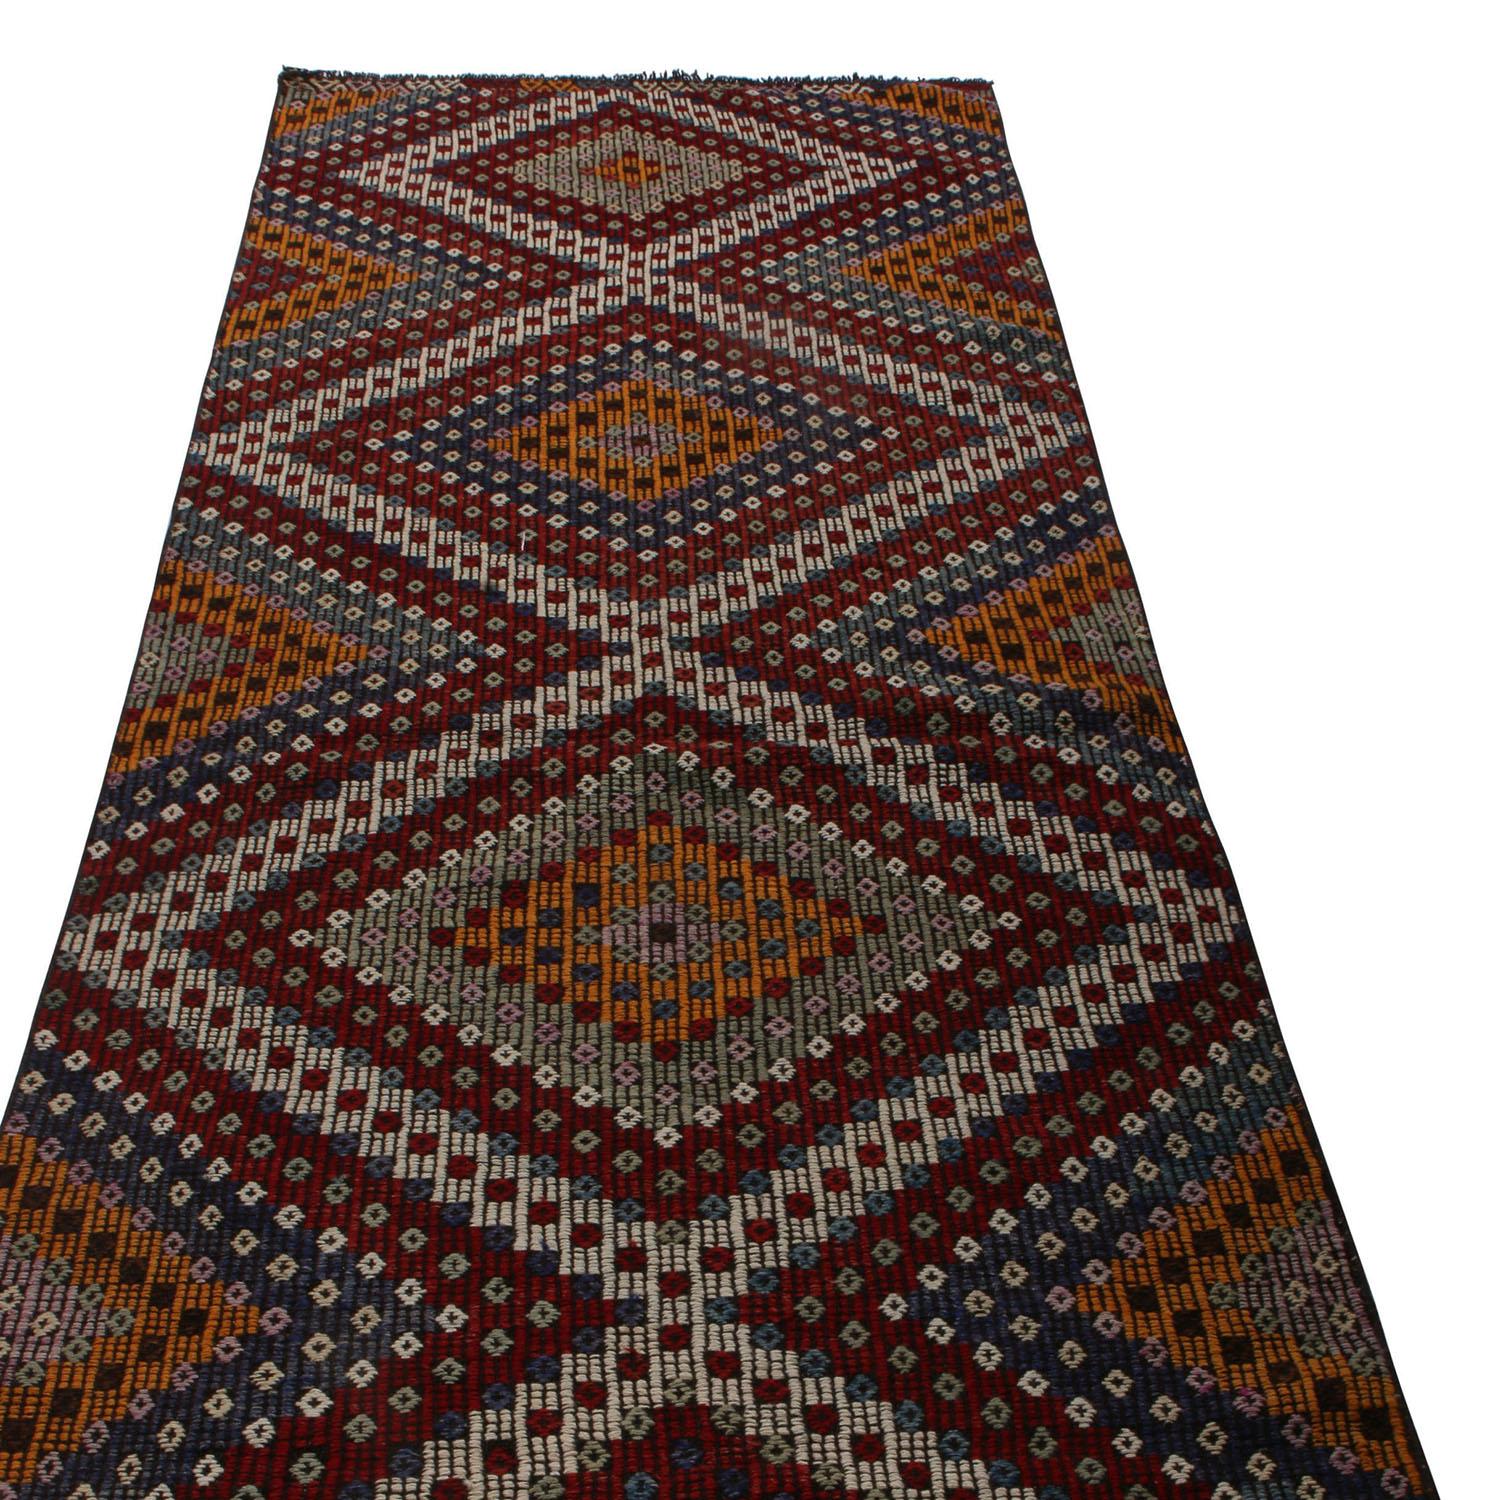 Handwoven in Turkey originating between 1950-1960, this vintage wool kilim runner enjoys a distinguished, textural high-low approach to flat weaving, beautifully complementing the classically radiant red, orange, blue and white hues adoring the